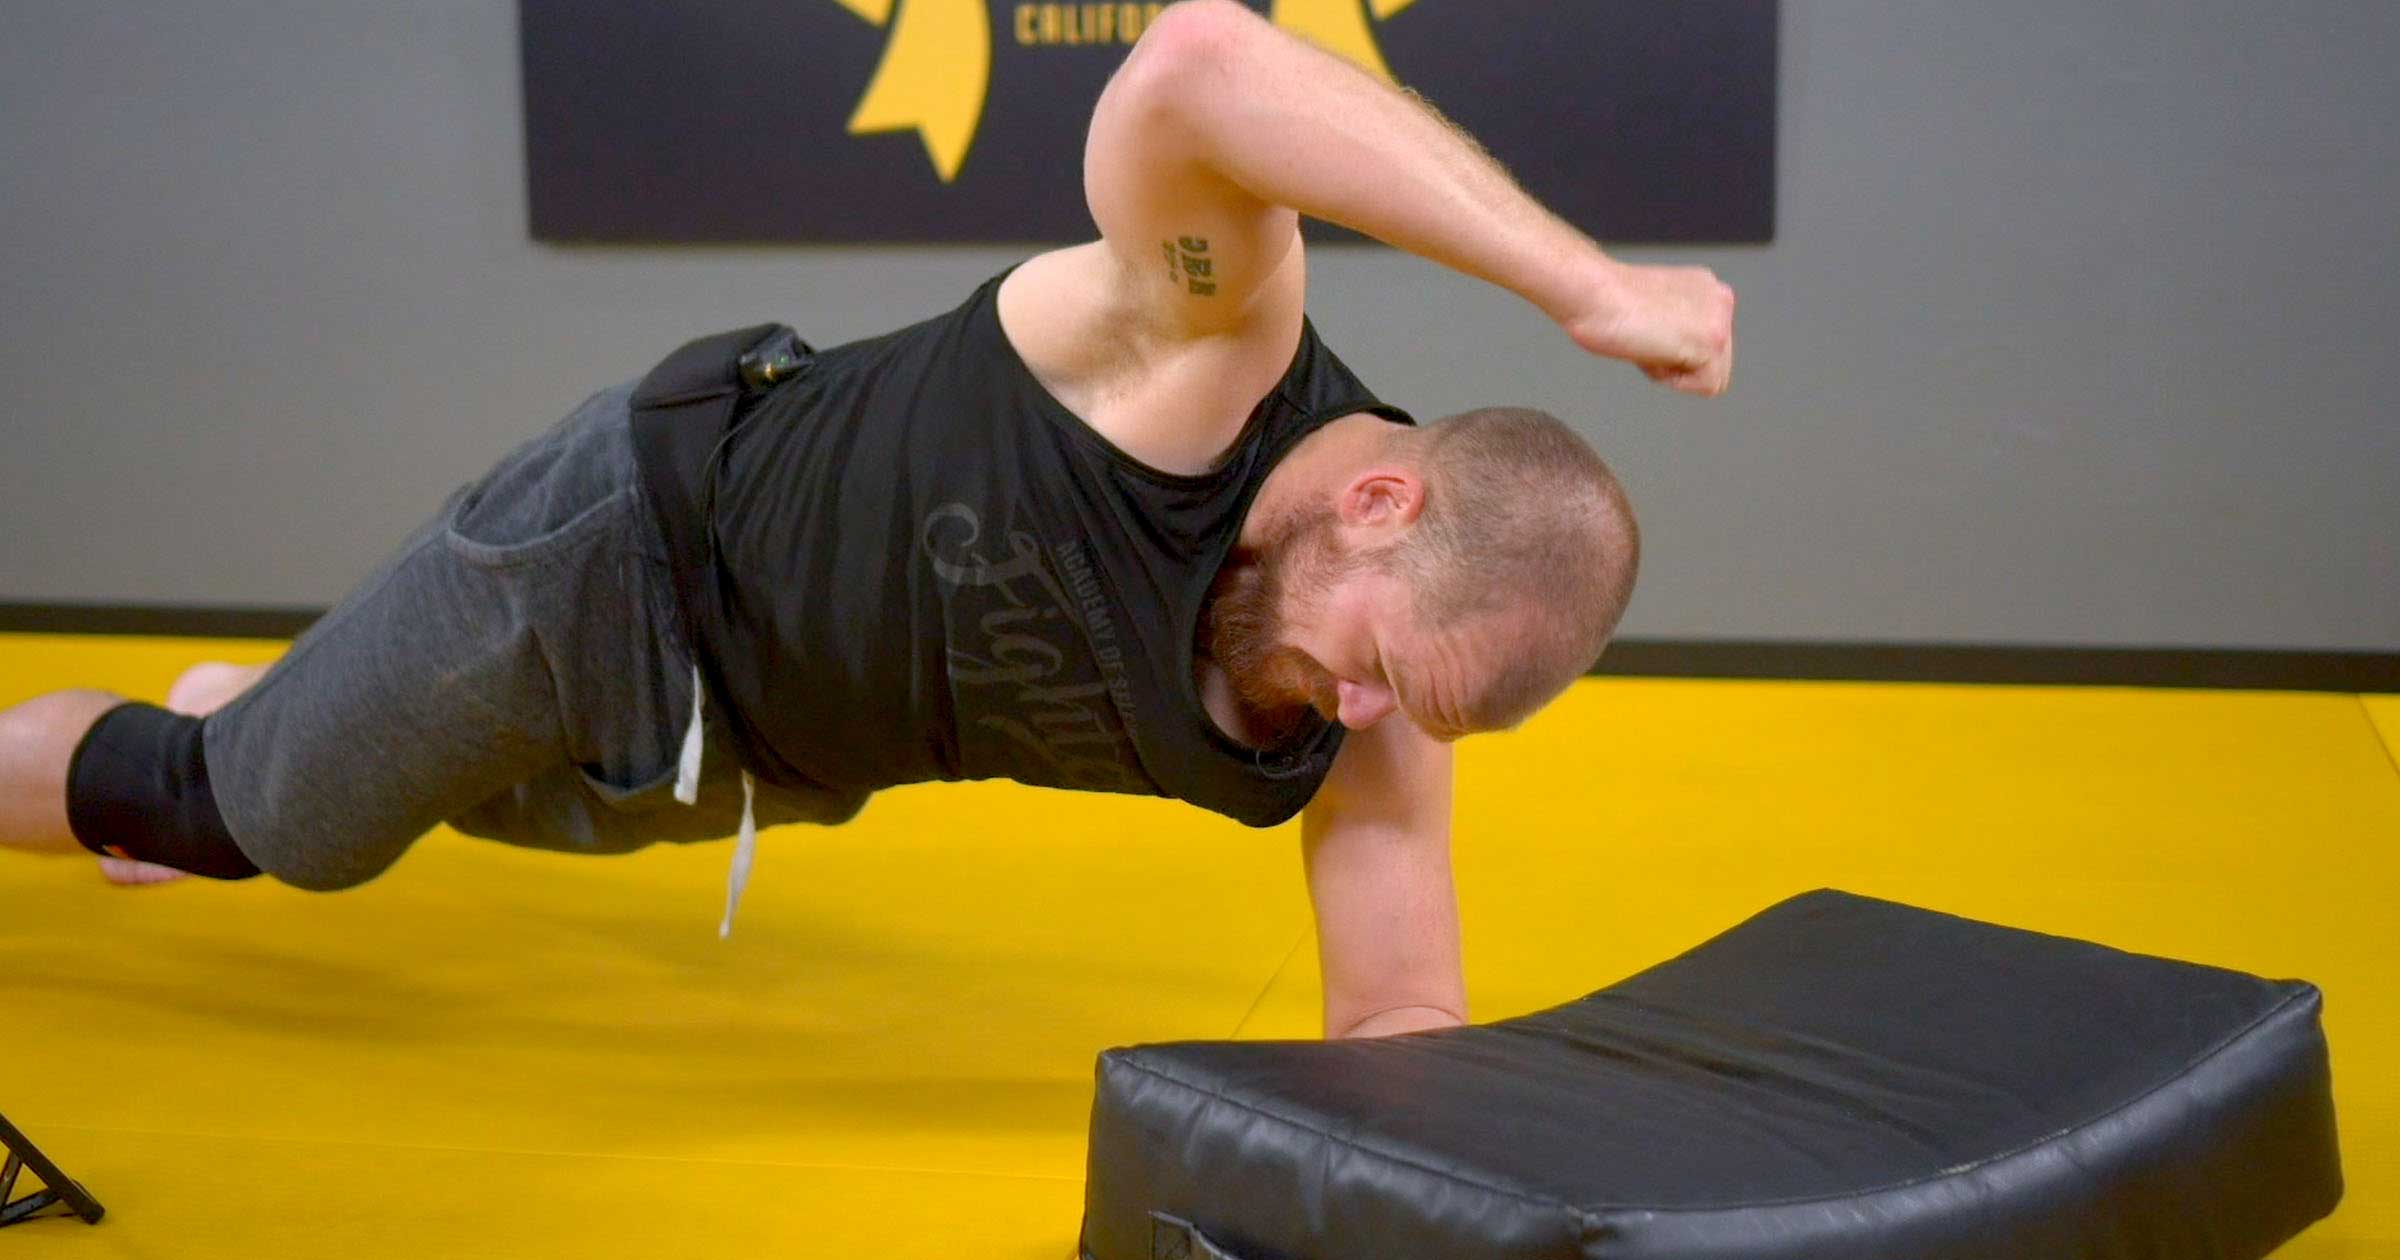 Man doing ground & pound on a pad in plank position.